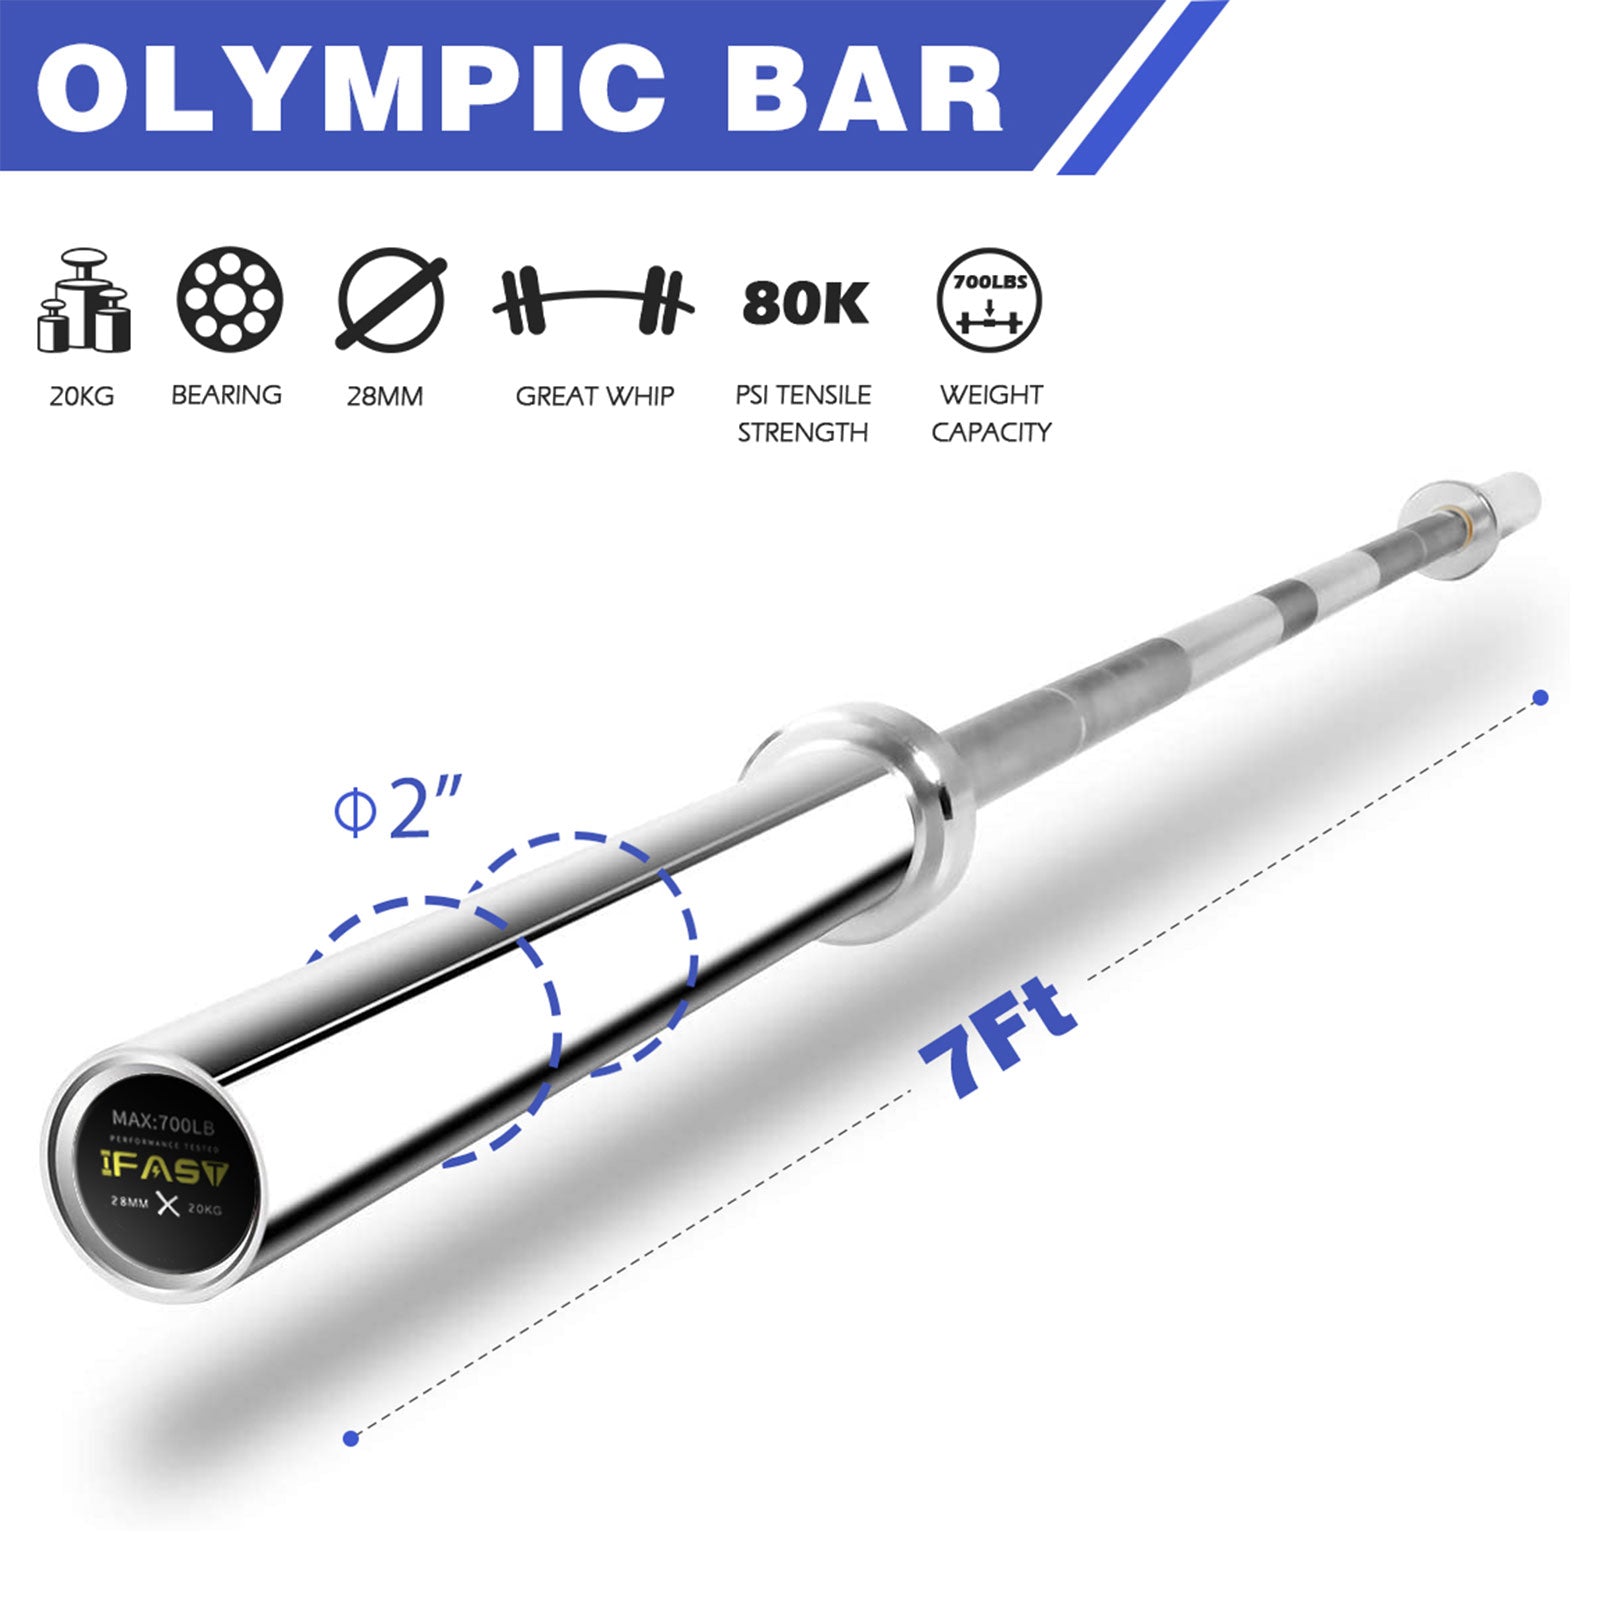 IFAST 7ft Olympic bar